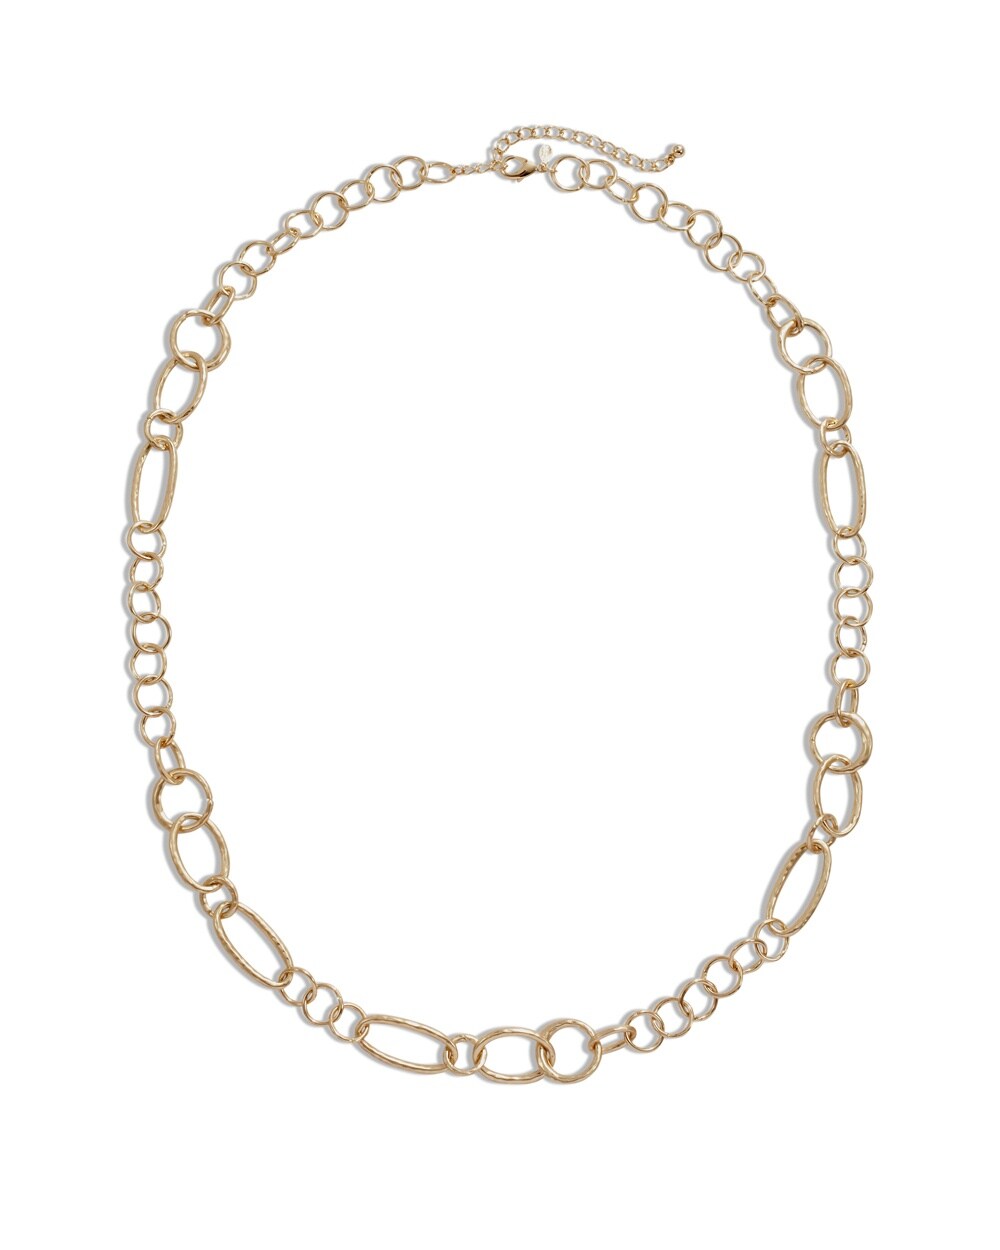 Bria Long Gold Chain Link Necklace